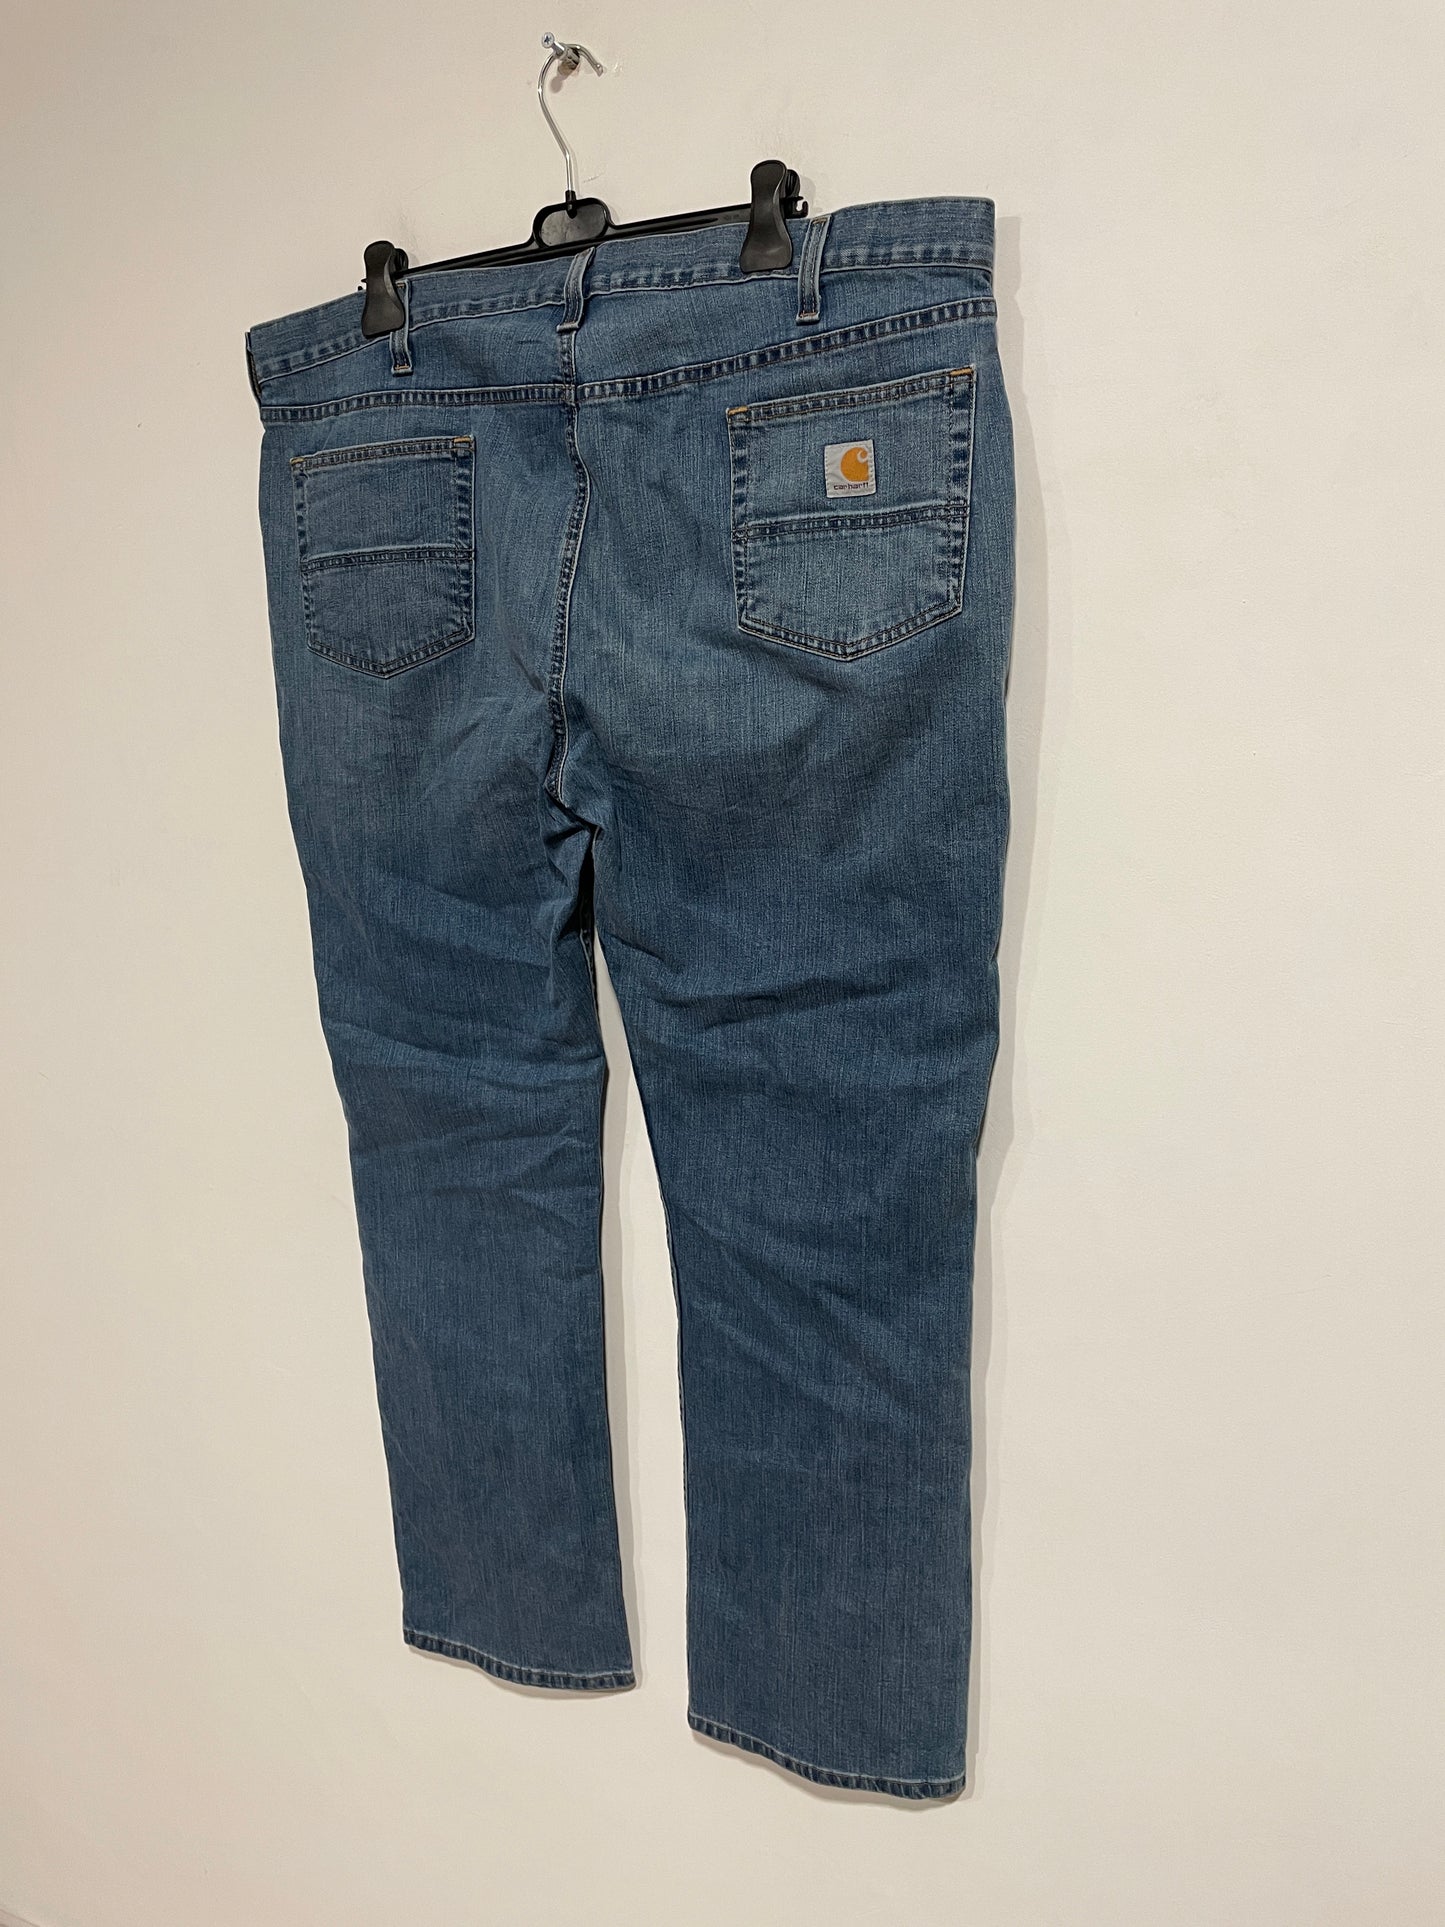 Jeans Carhartt from USA (MR309)